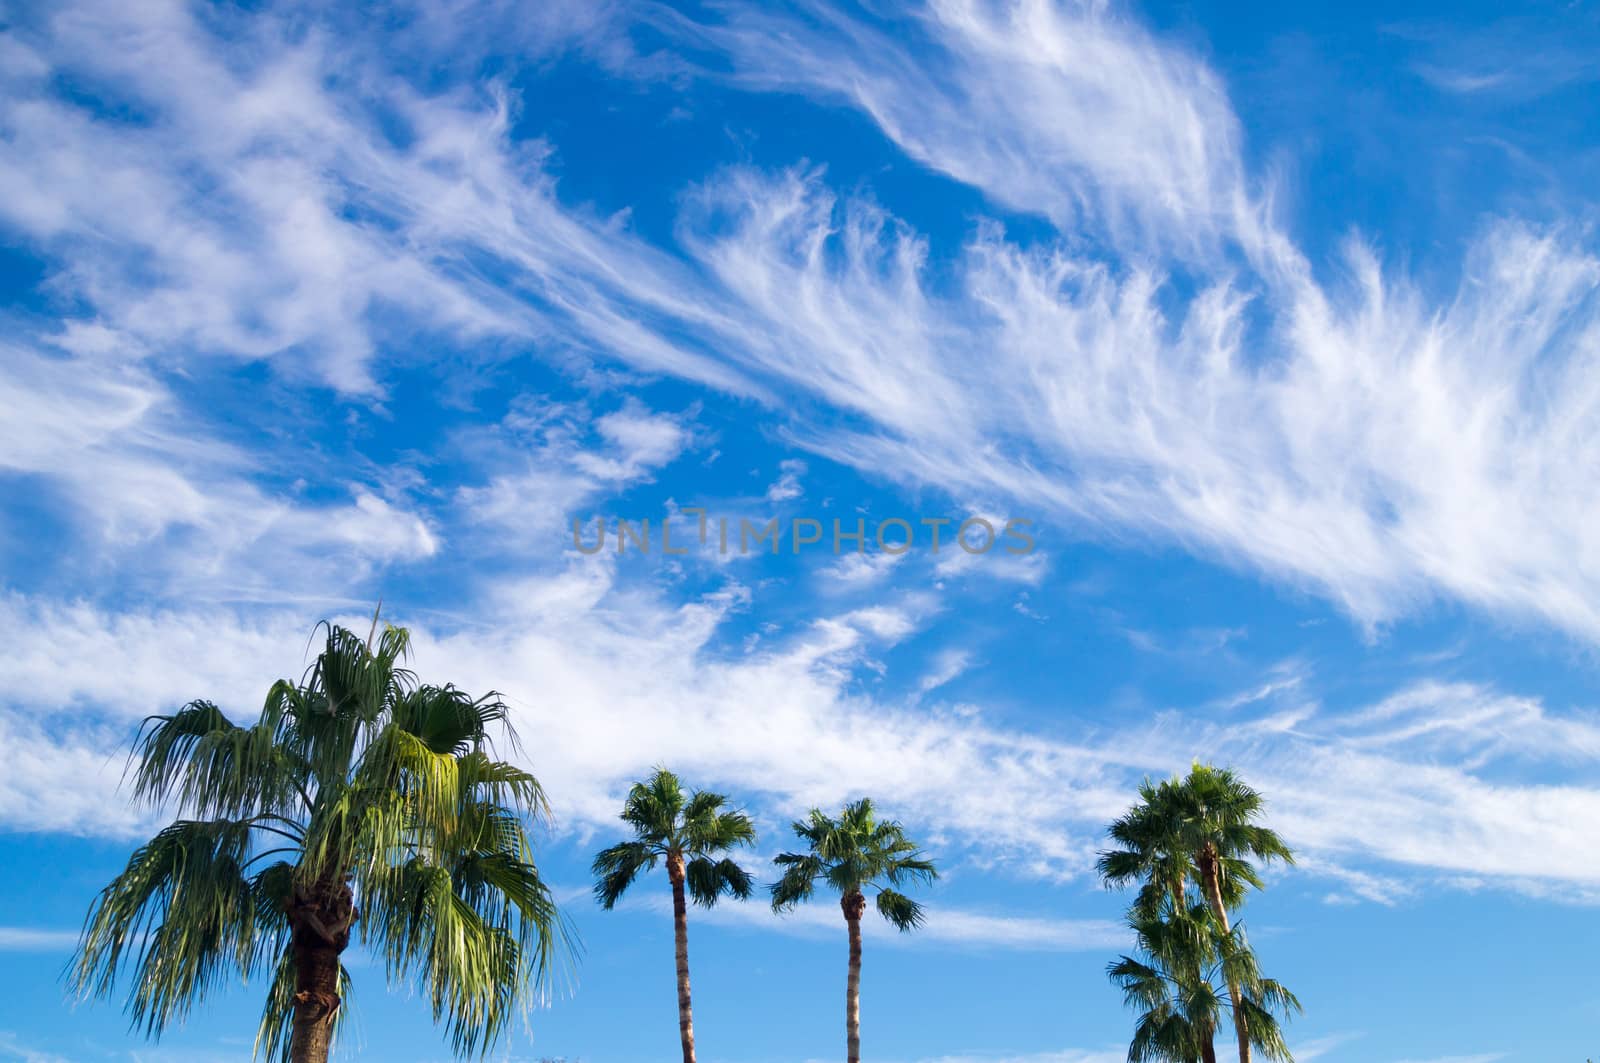 Palm trees on a cloud filled sky